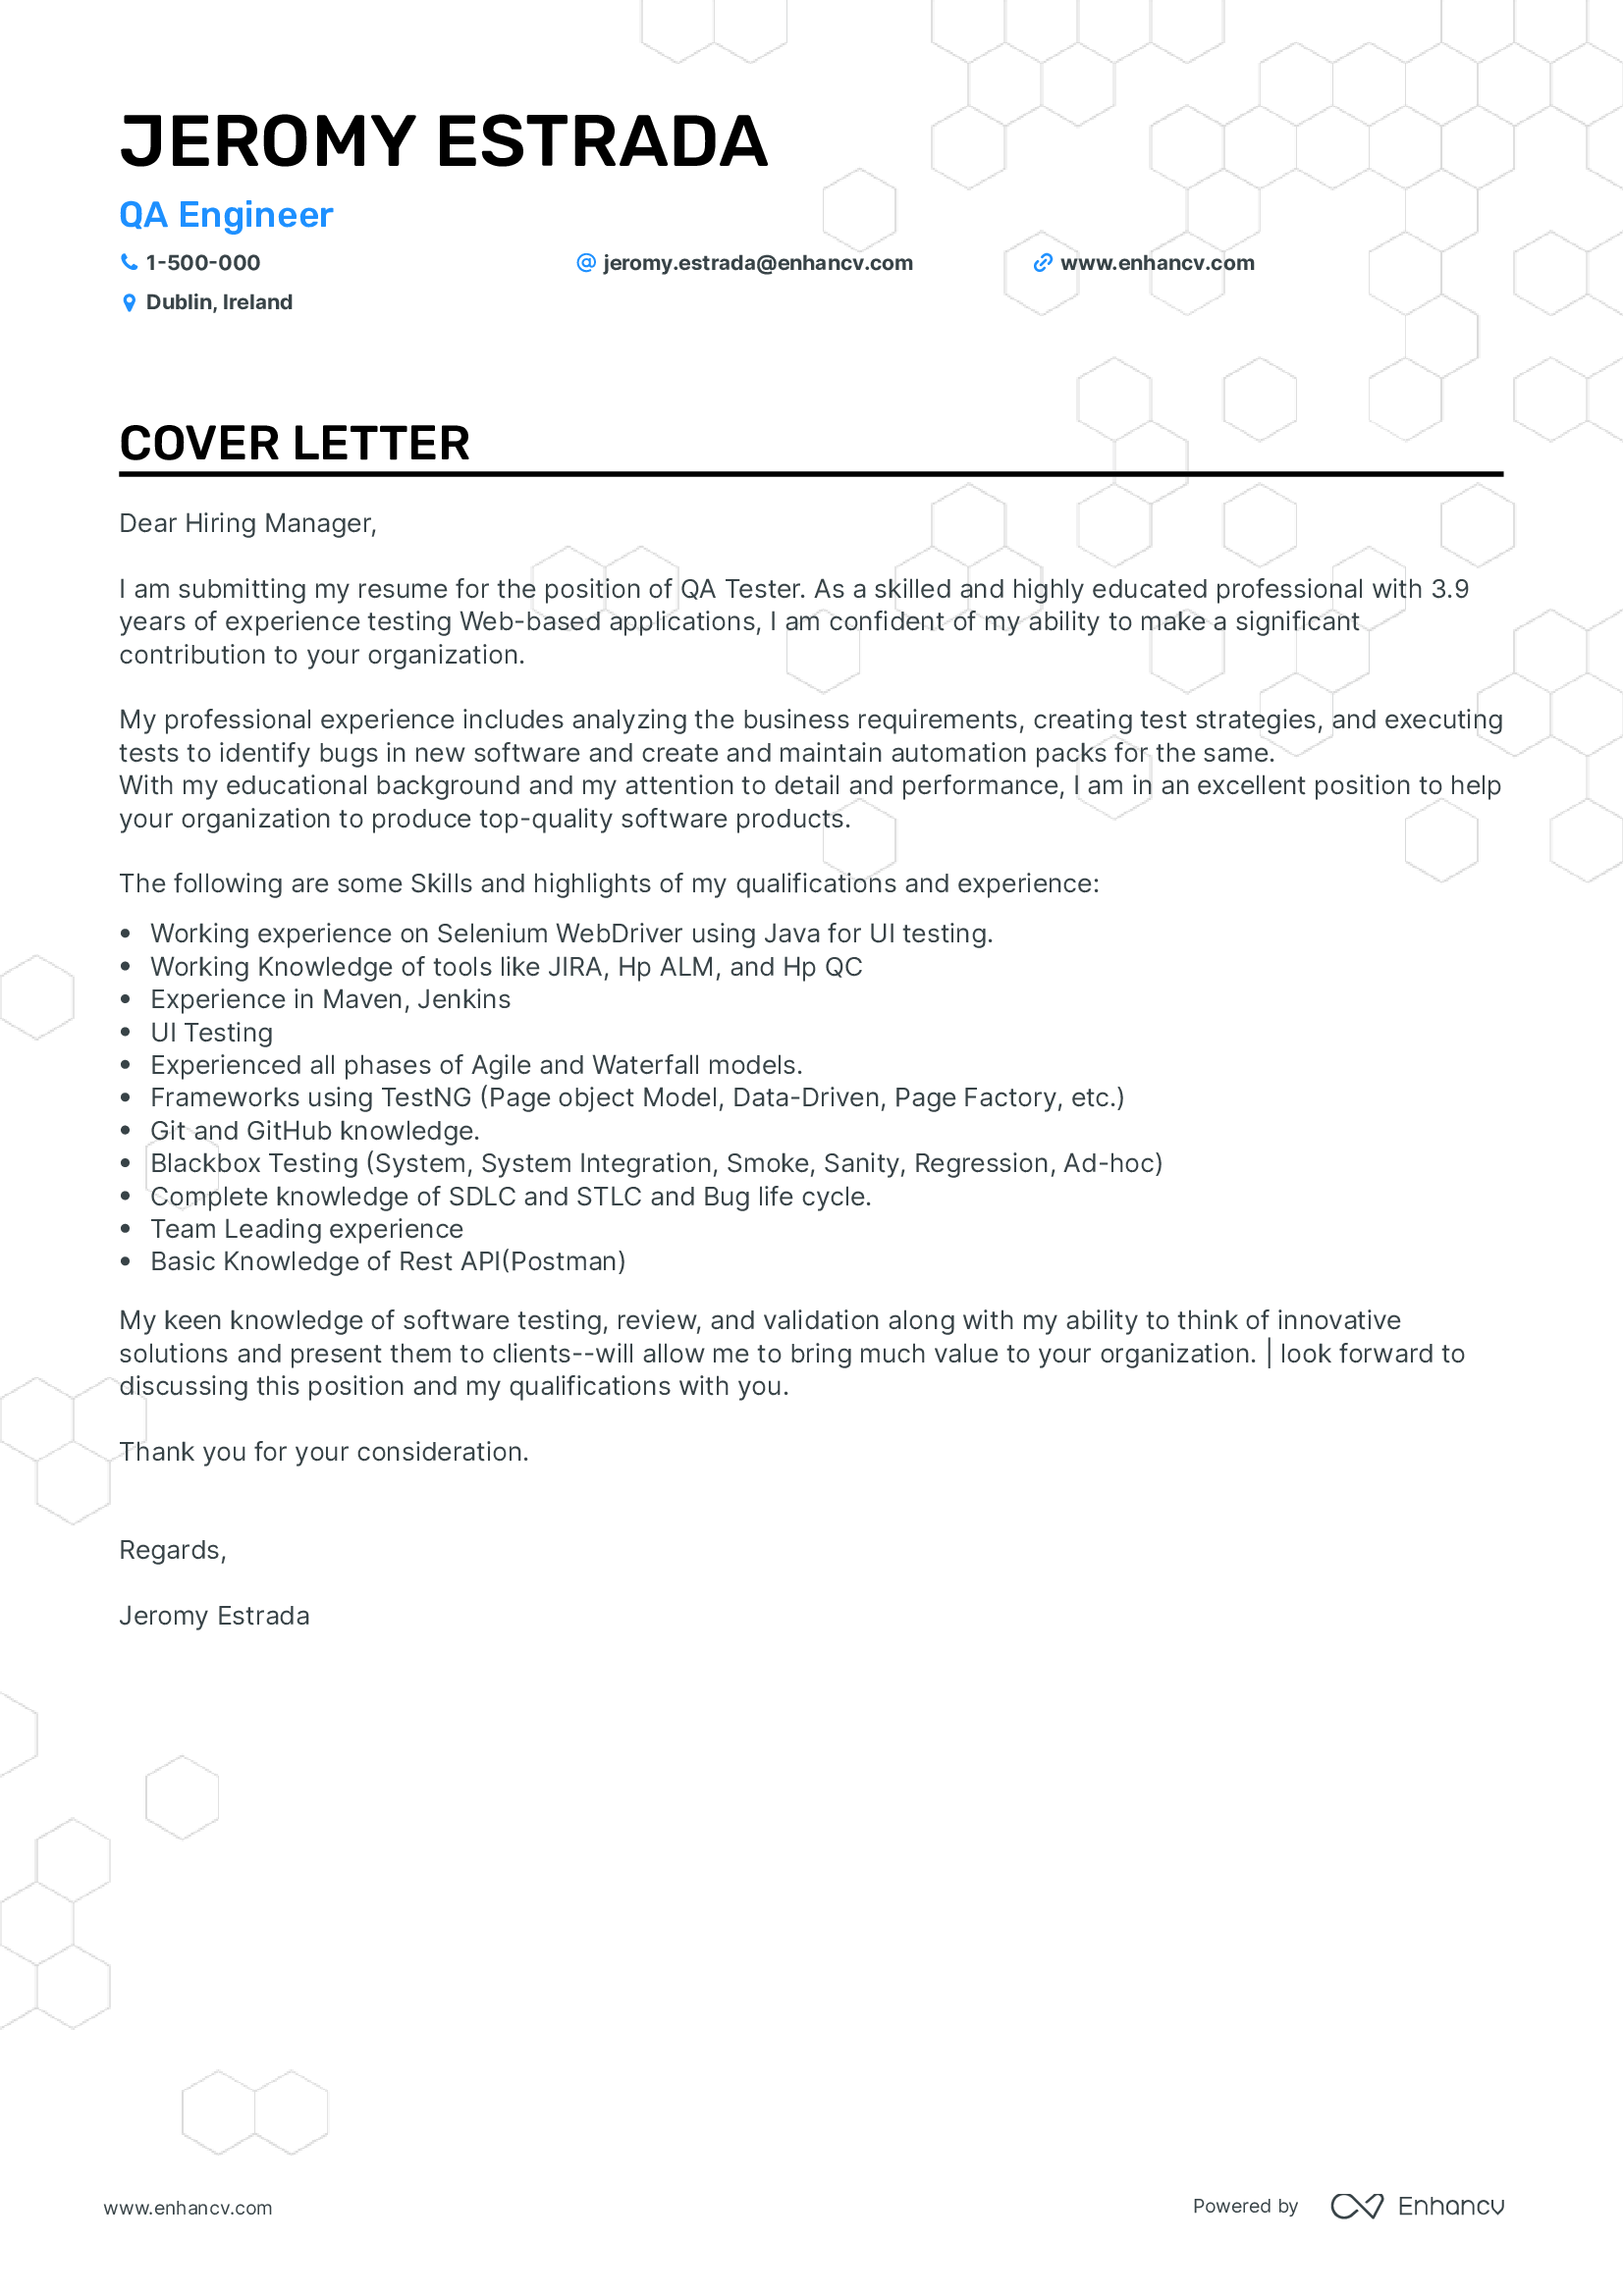 cover letter sample with 2 years experience